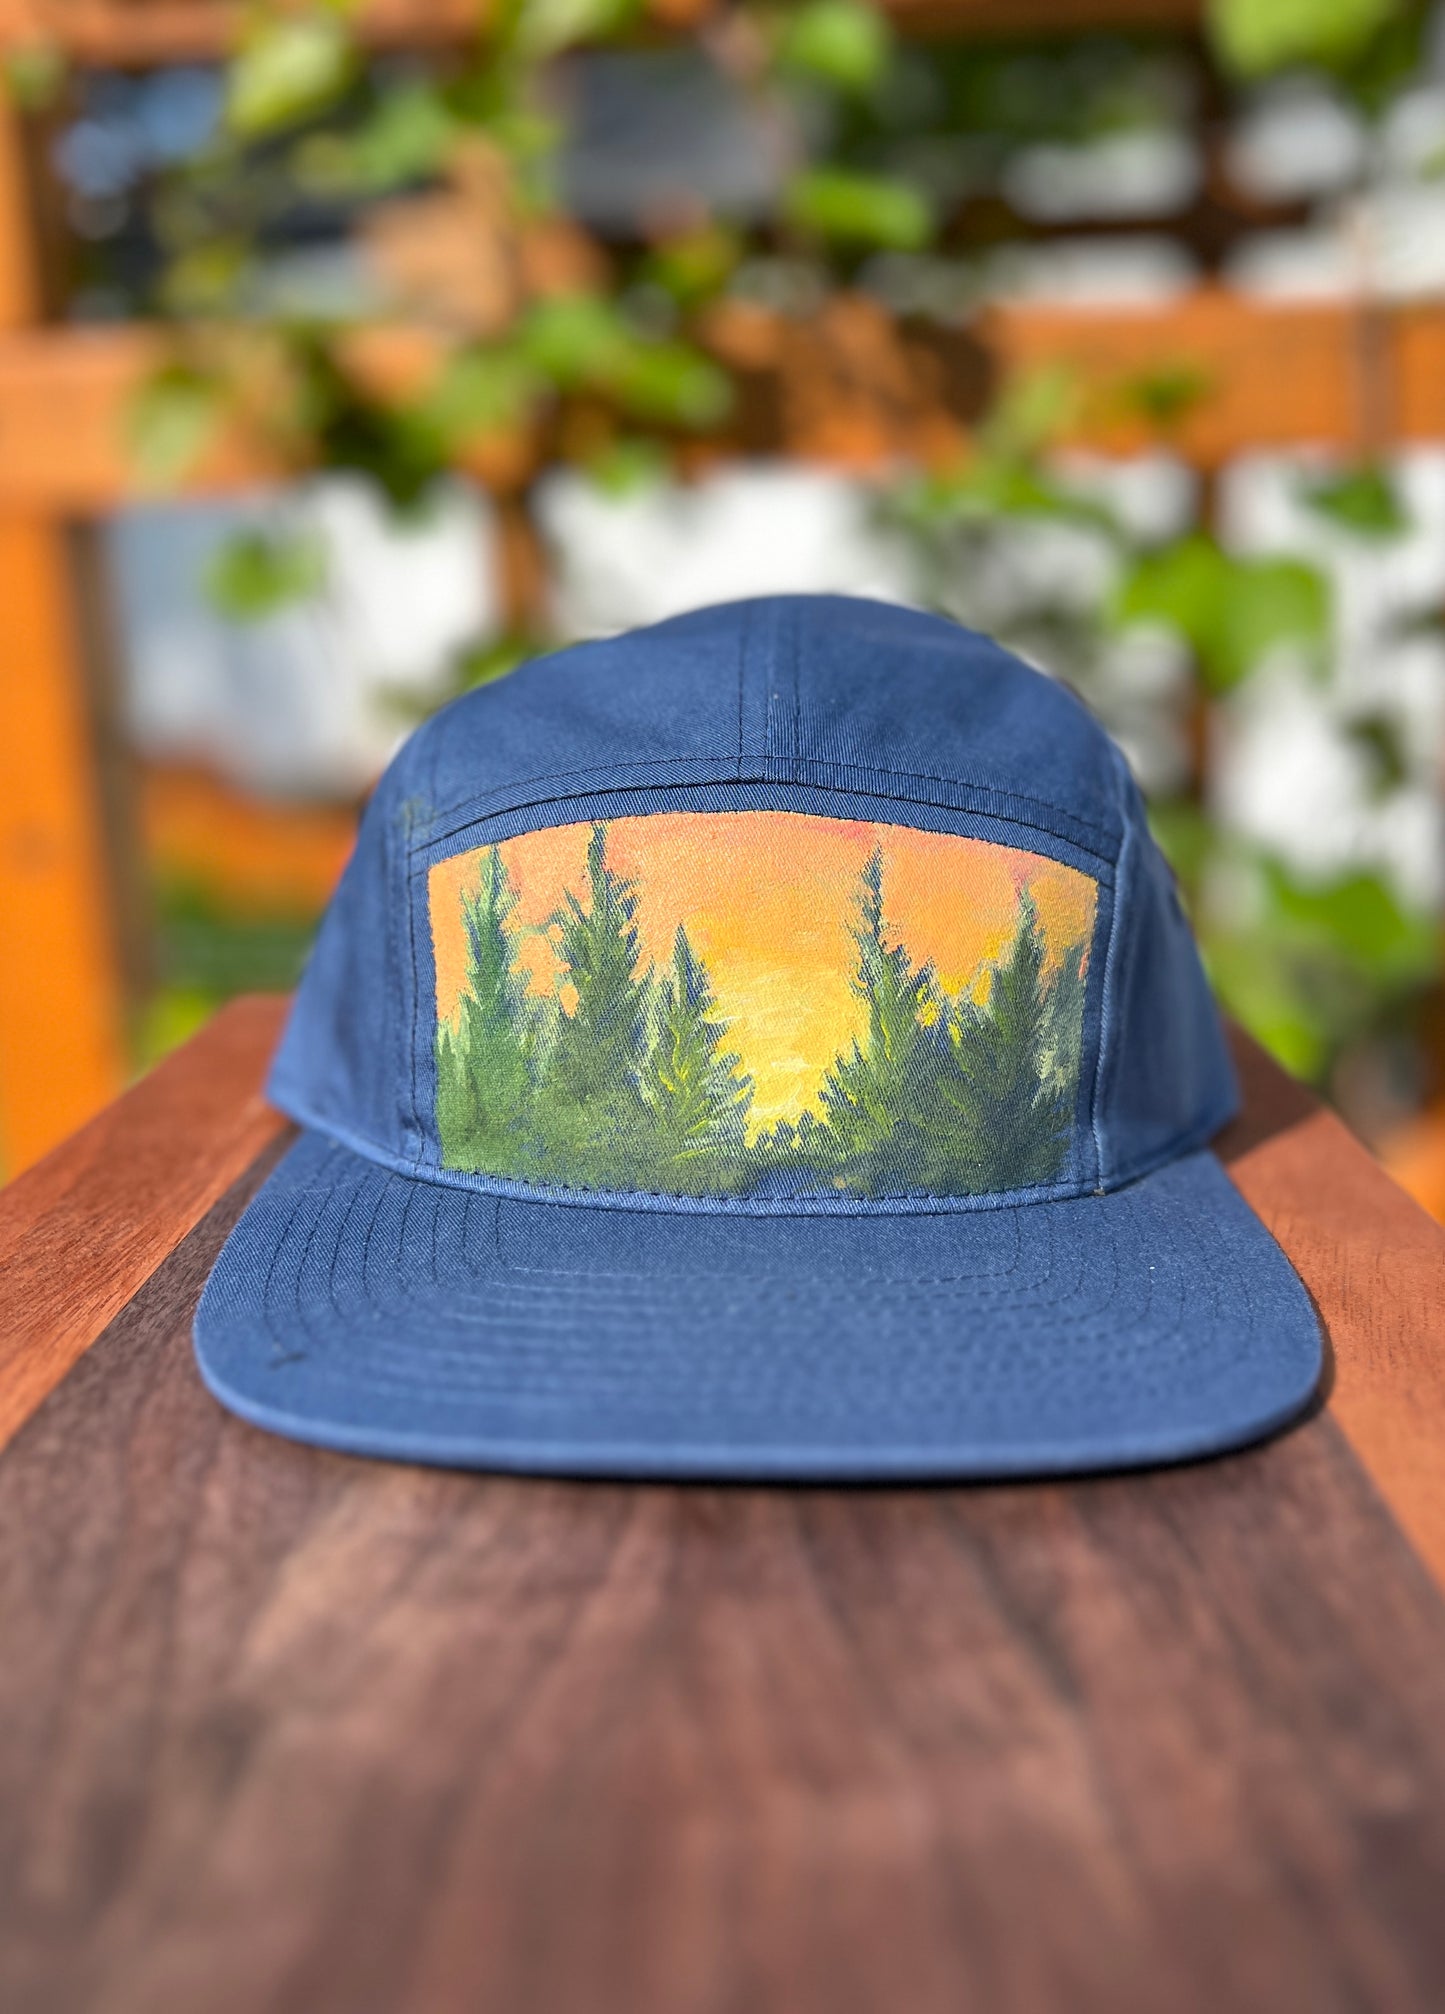 "Golden Forest" Hand Painted Hat